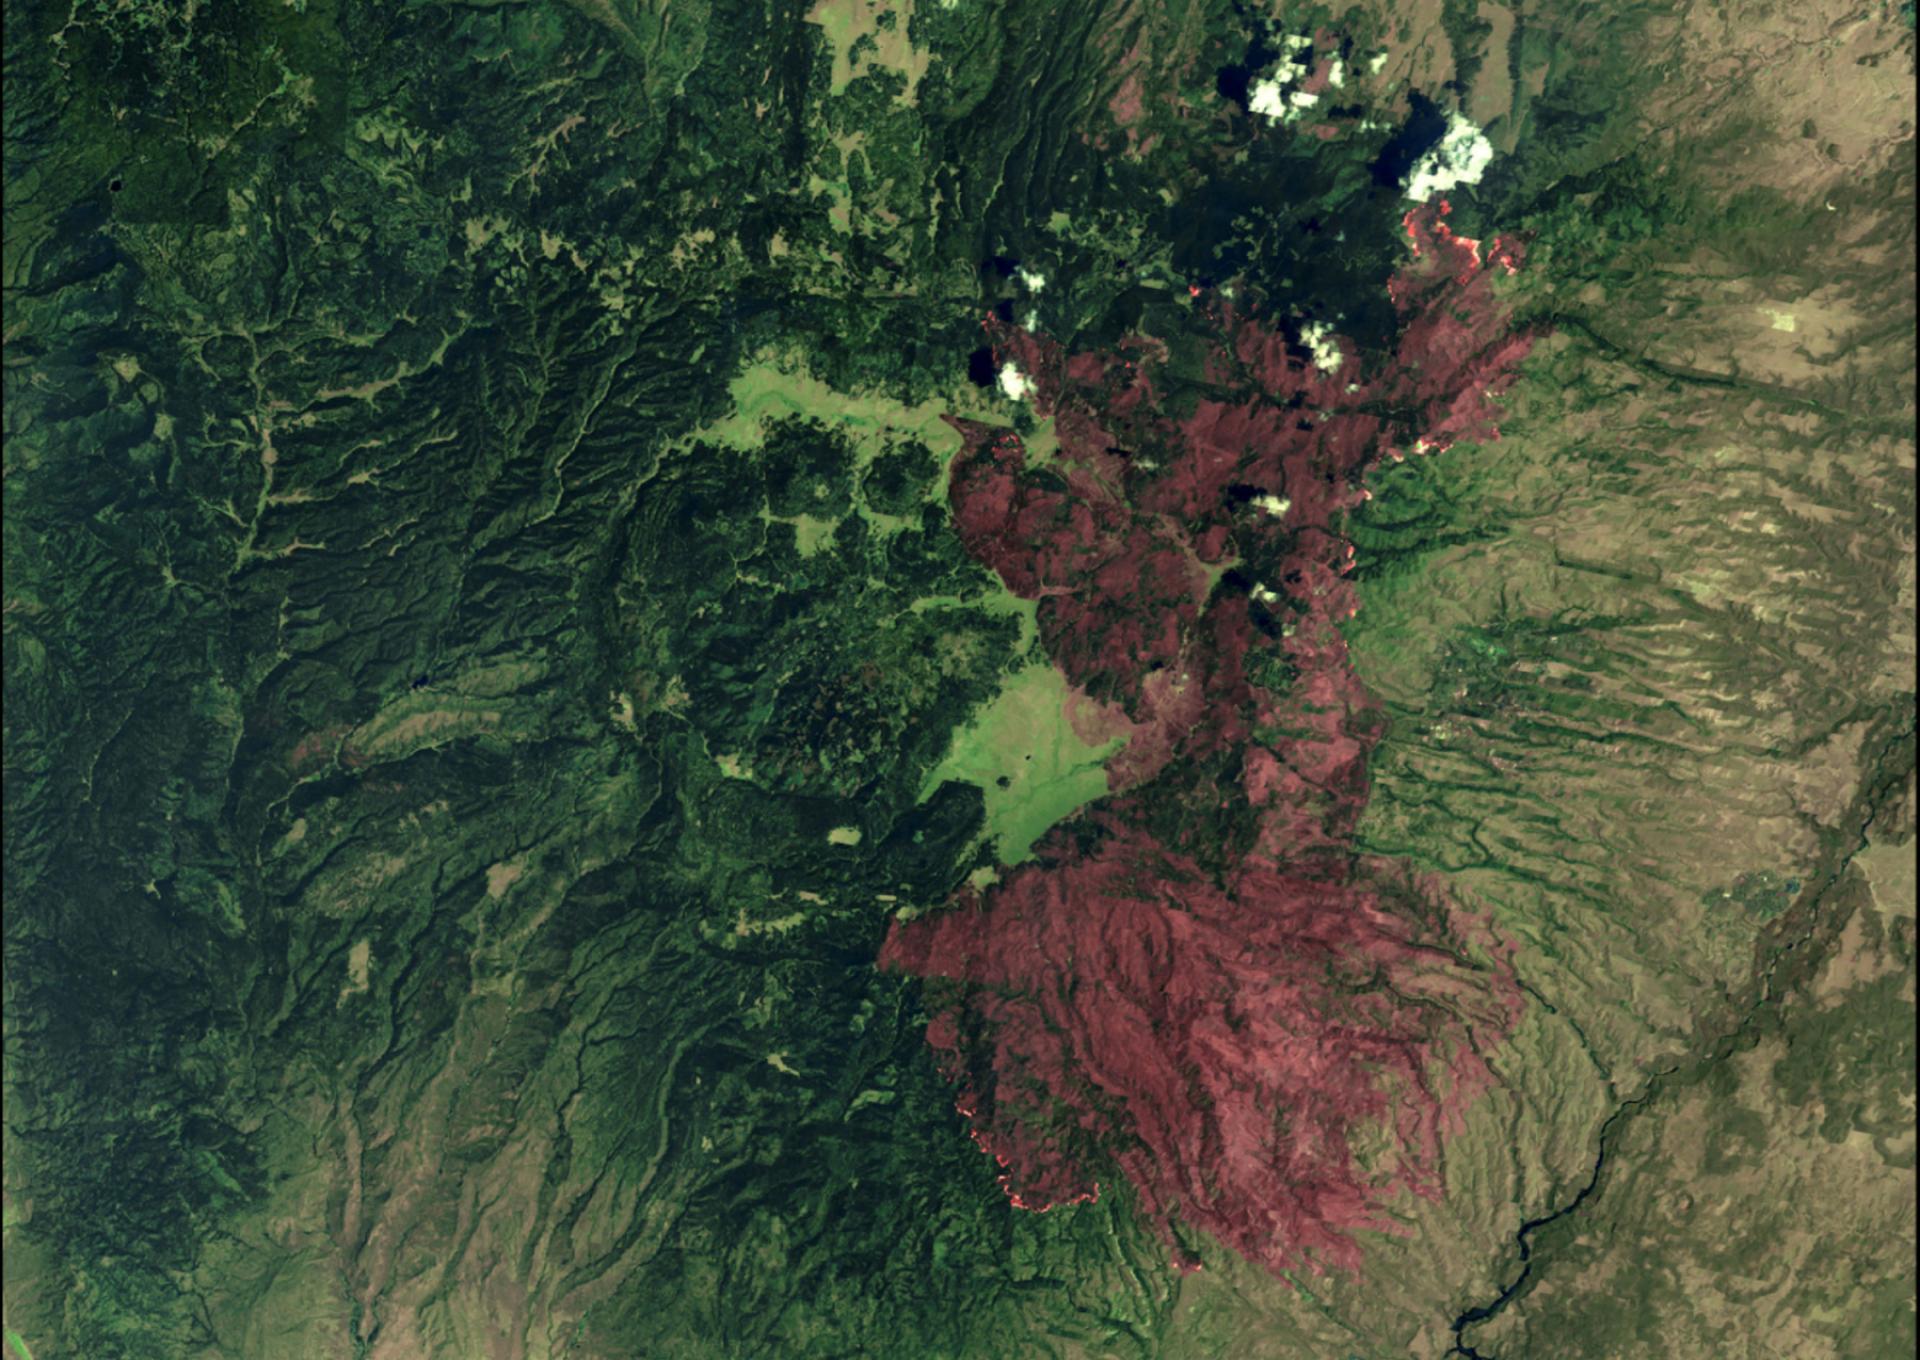 Aerial satellite image of green-tinged terrain showing Santa Fe National Forest on July 2, 2011,  during the Las Conchas Fire. Reddish overlay indicates areas burned